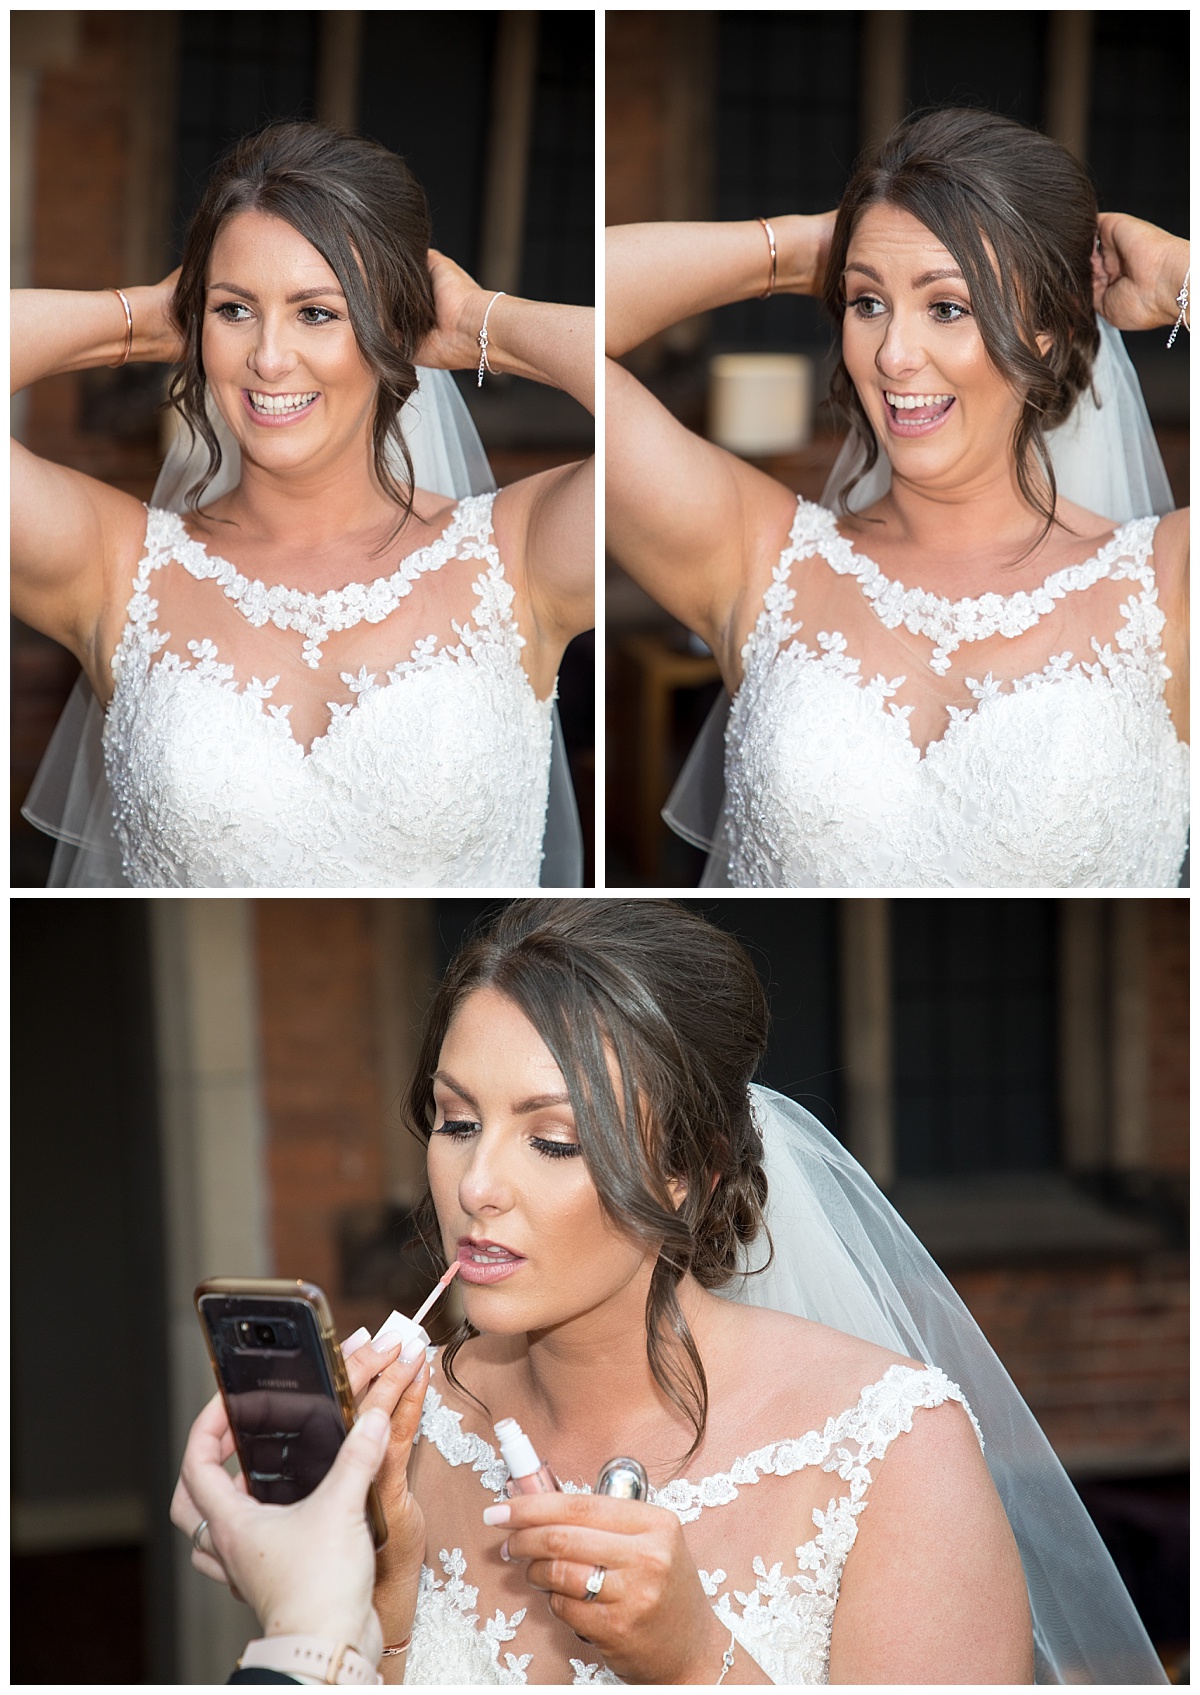 Wedding Photography Manchester - Melissa and Stuarts Mere Golf Resort And Spa Wedding Day 77